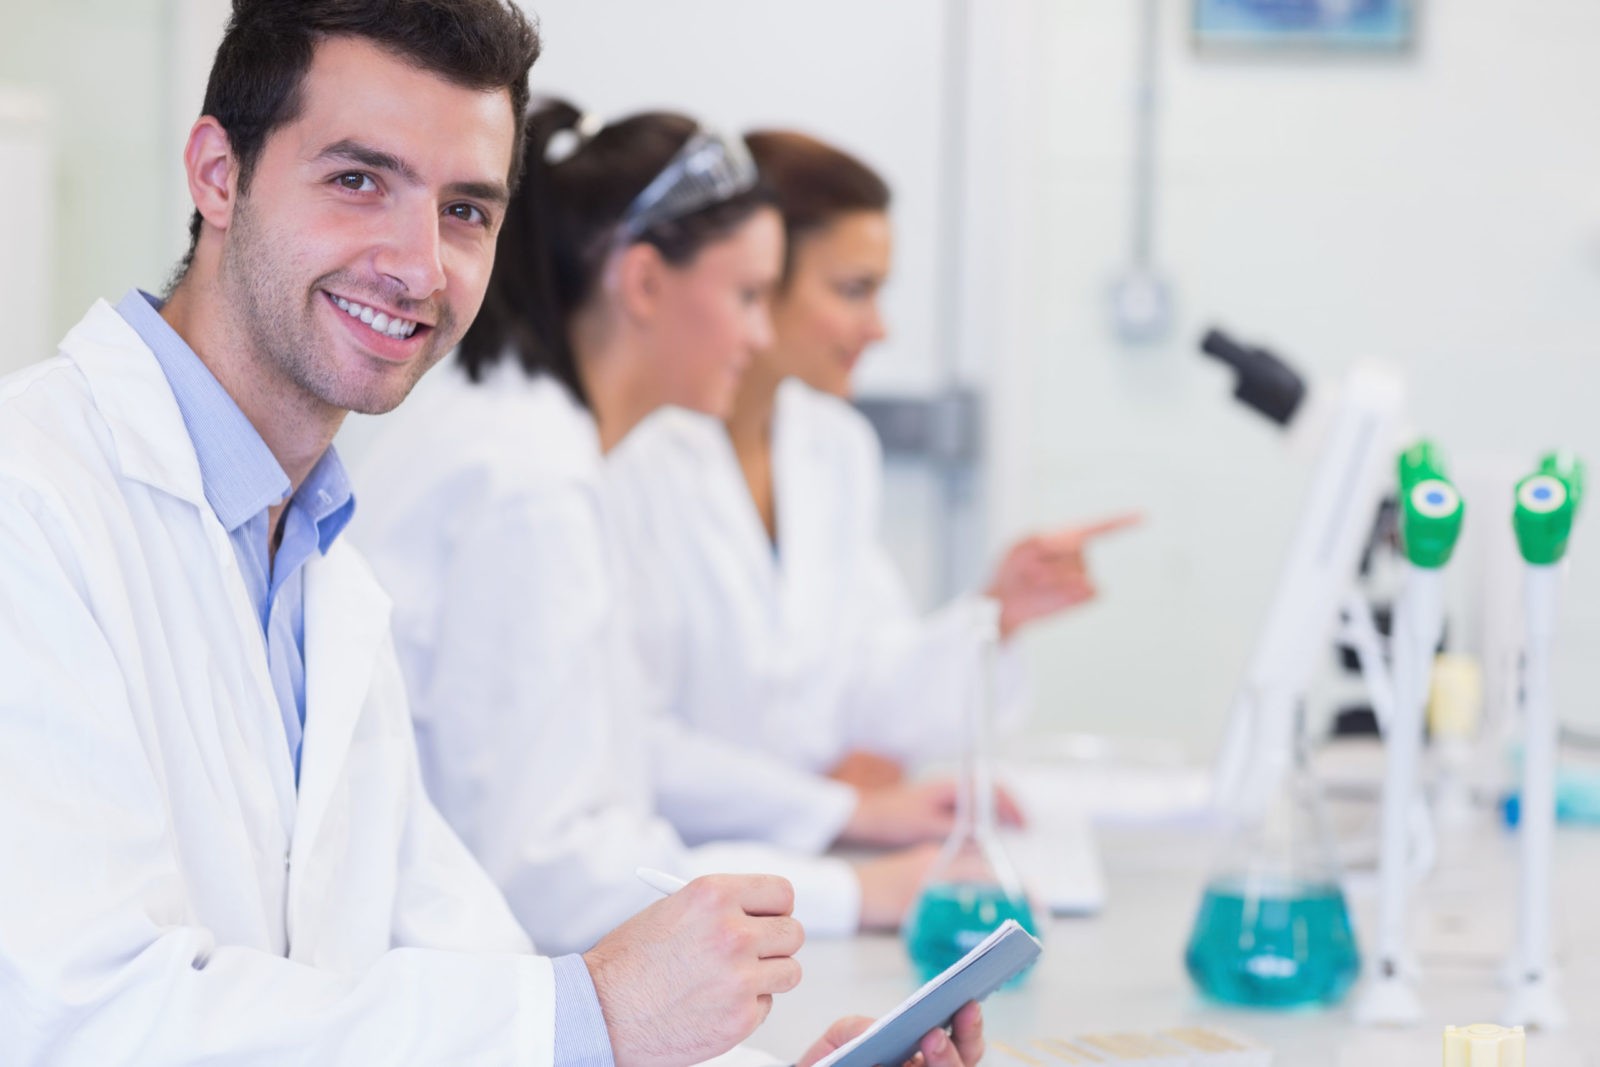 Scientists at lab bench with male scientist smiling